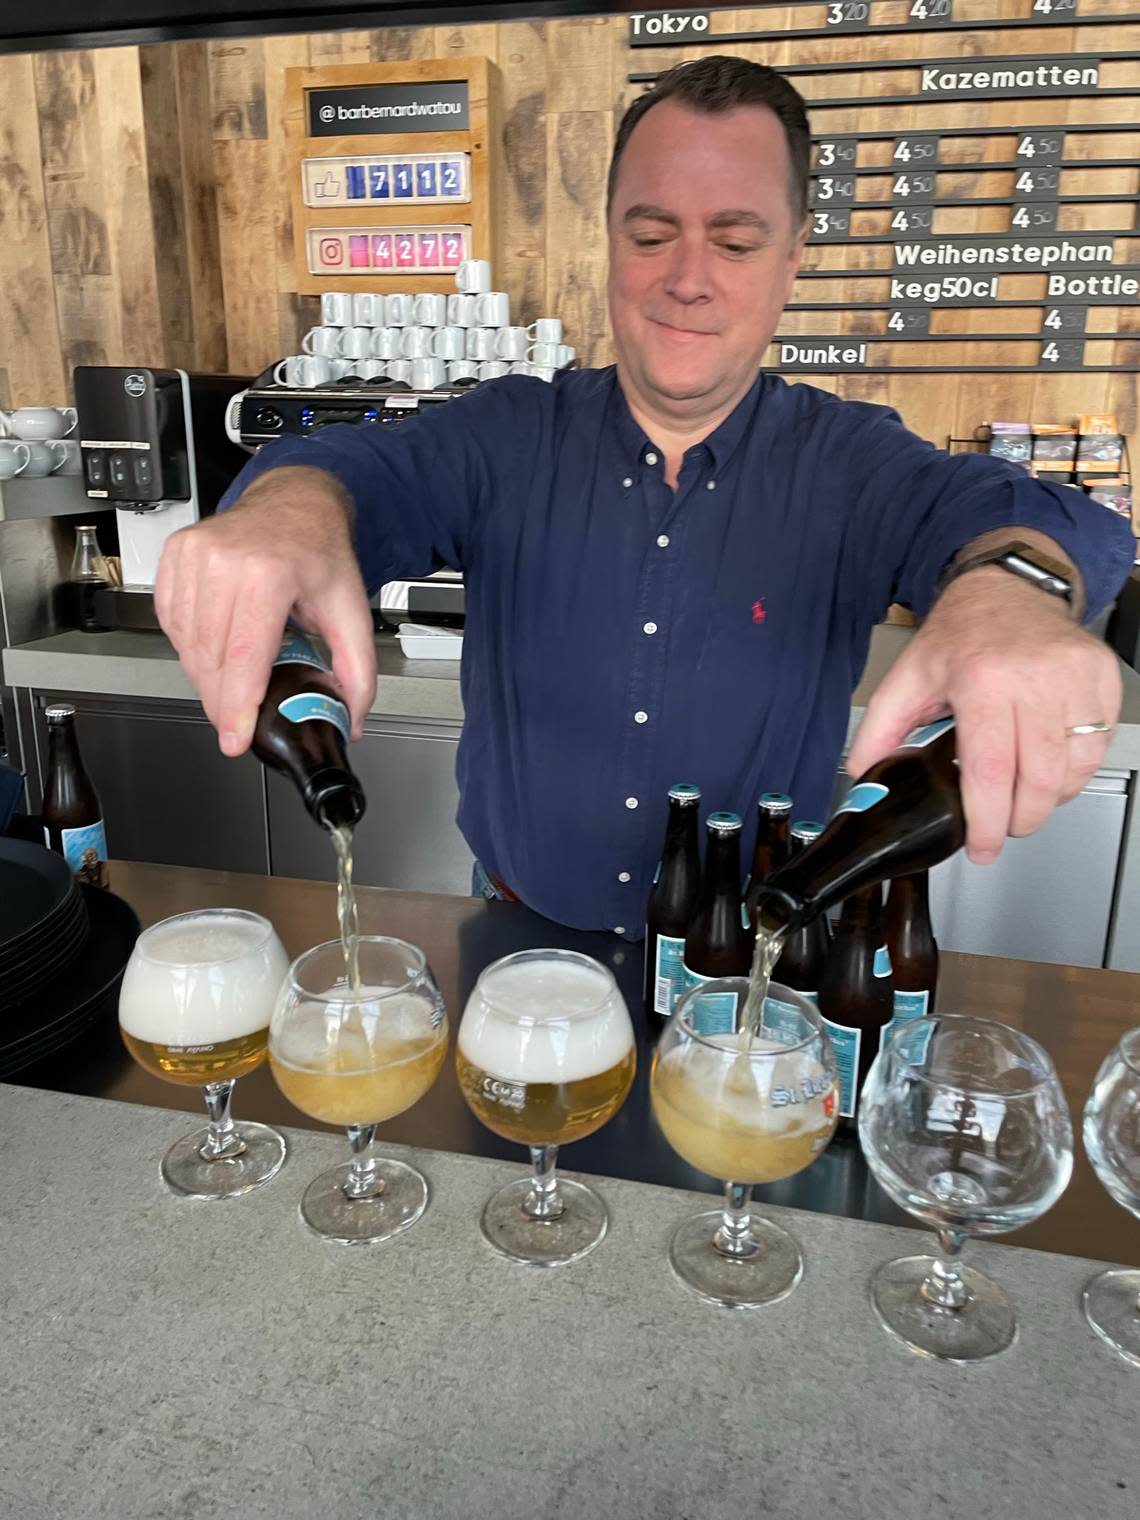 Marco Passarella. sales & marketing manager at Brouwerij St.Bernardus, pours beers during a private tour.